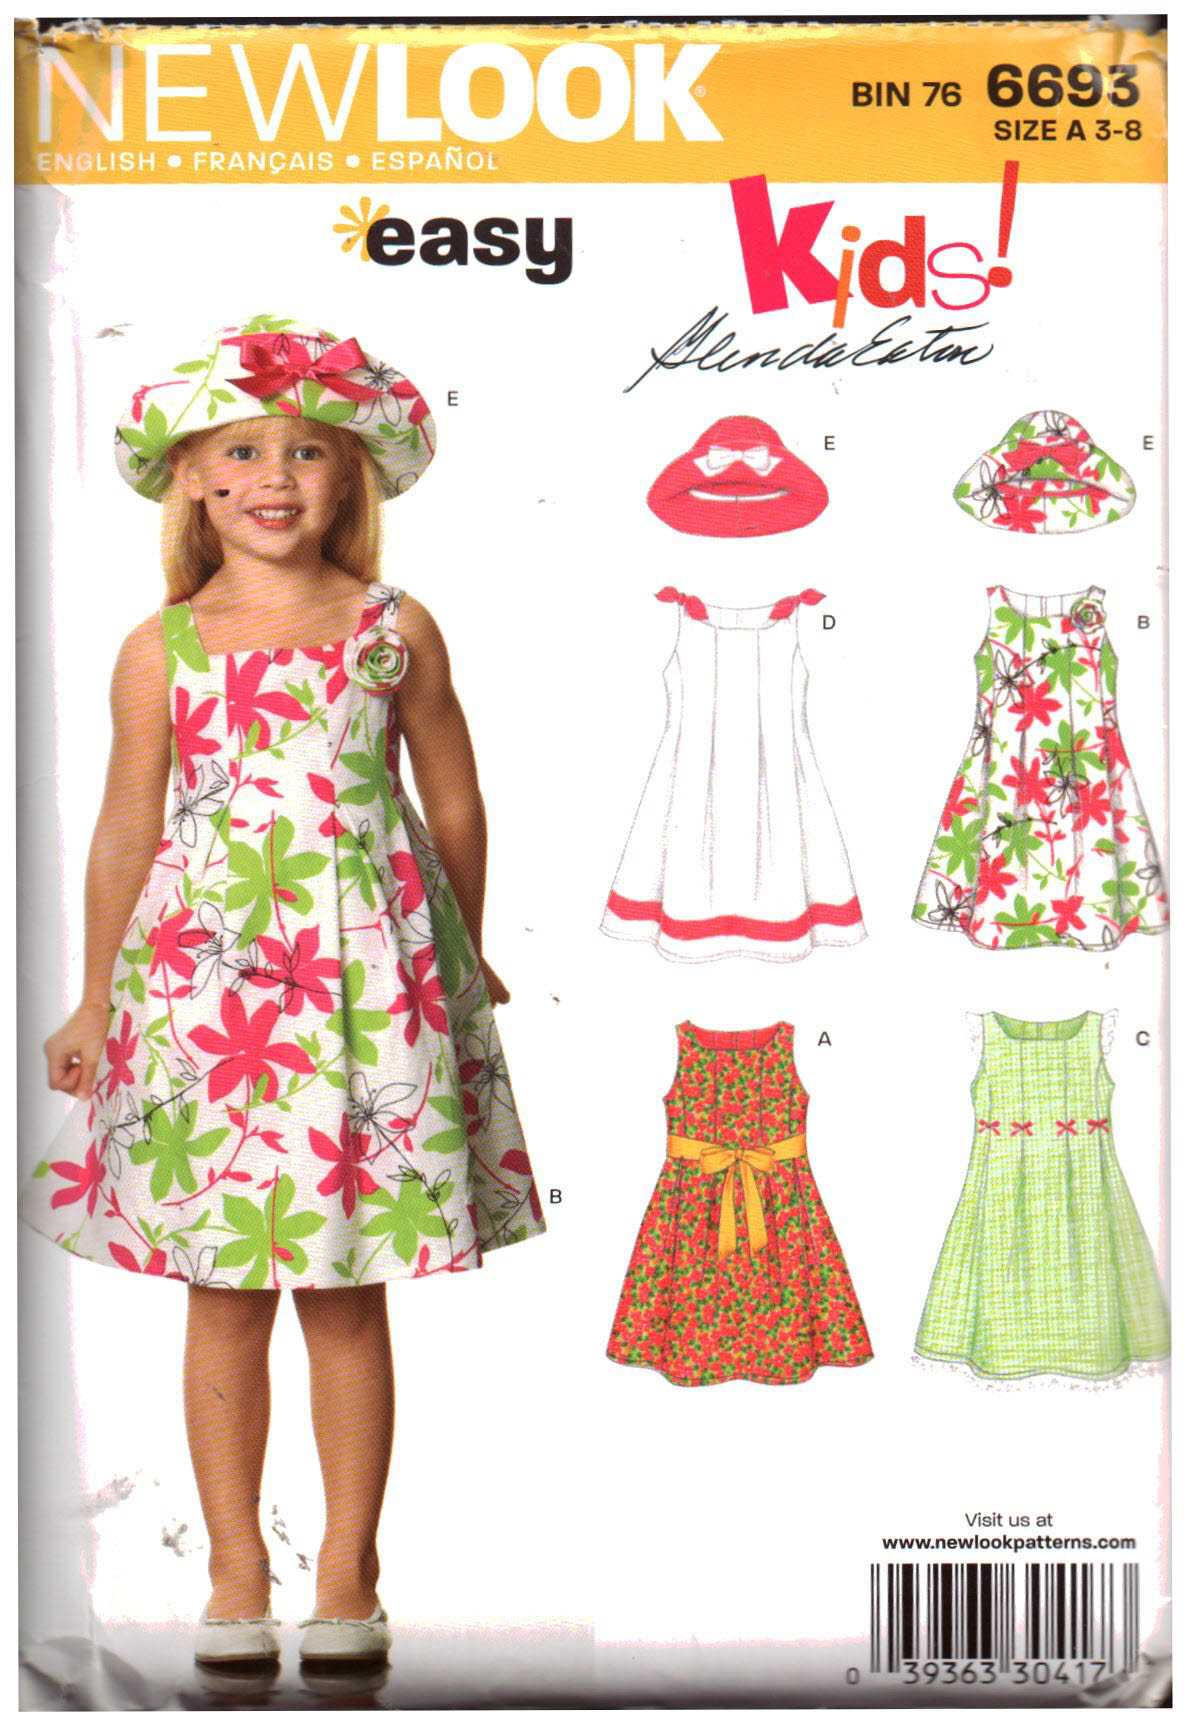 New Look Sewing Pattern N6731 Misses' Dresses 6731 - Patterns and Plains